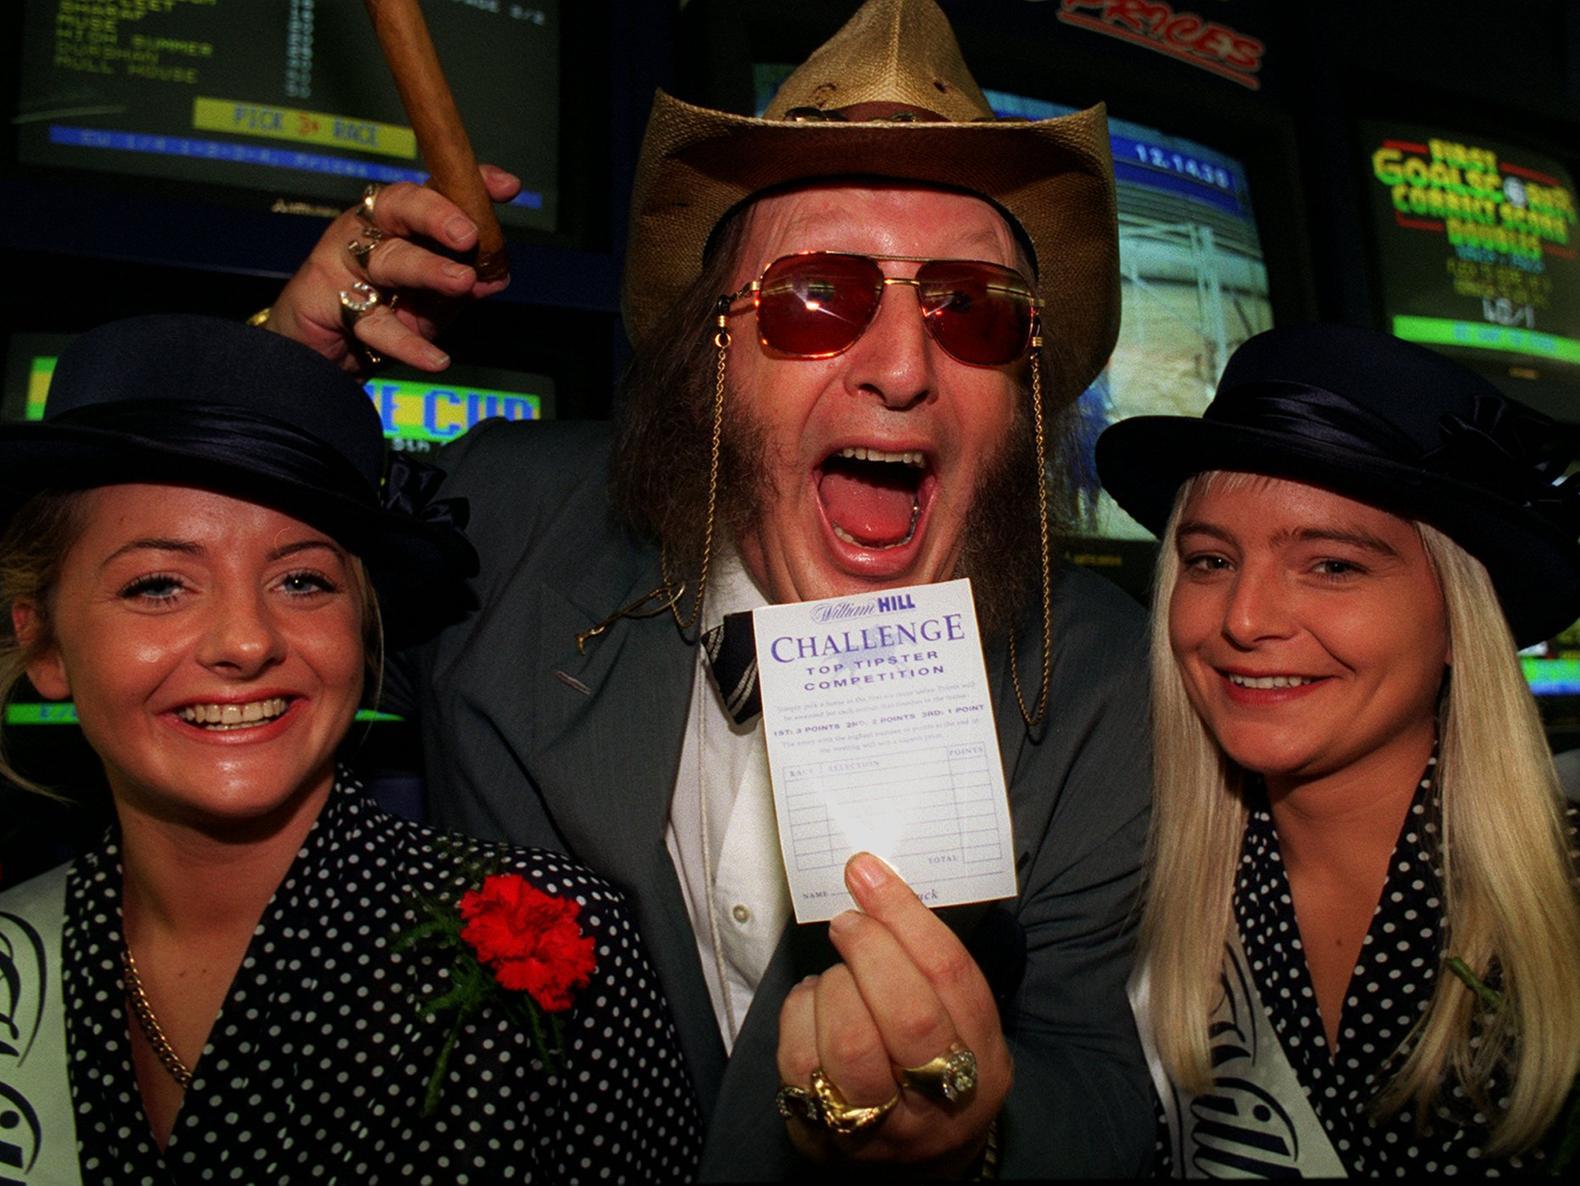 Samantha Allen (left) and Debra Wannan (right) with racing pundit John McCririck at Wiiliam Hill bookmakers on Vicar Lane where he placed a bet on behalf of Half and Half.